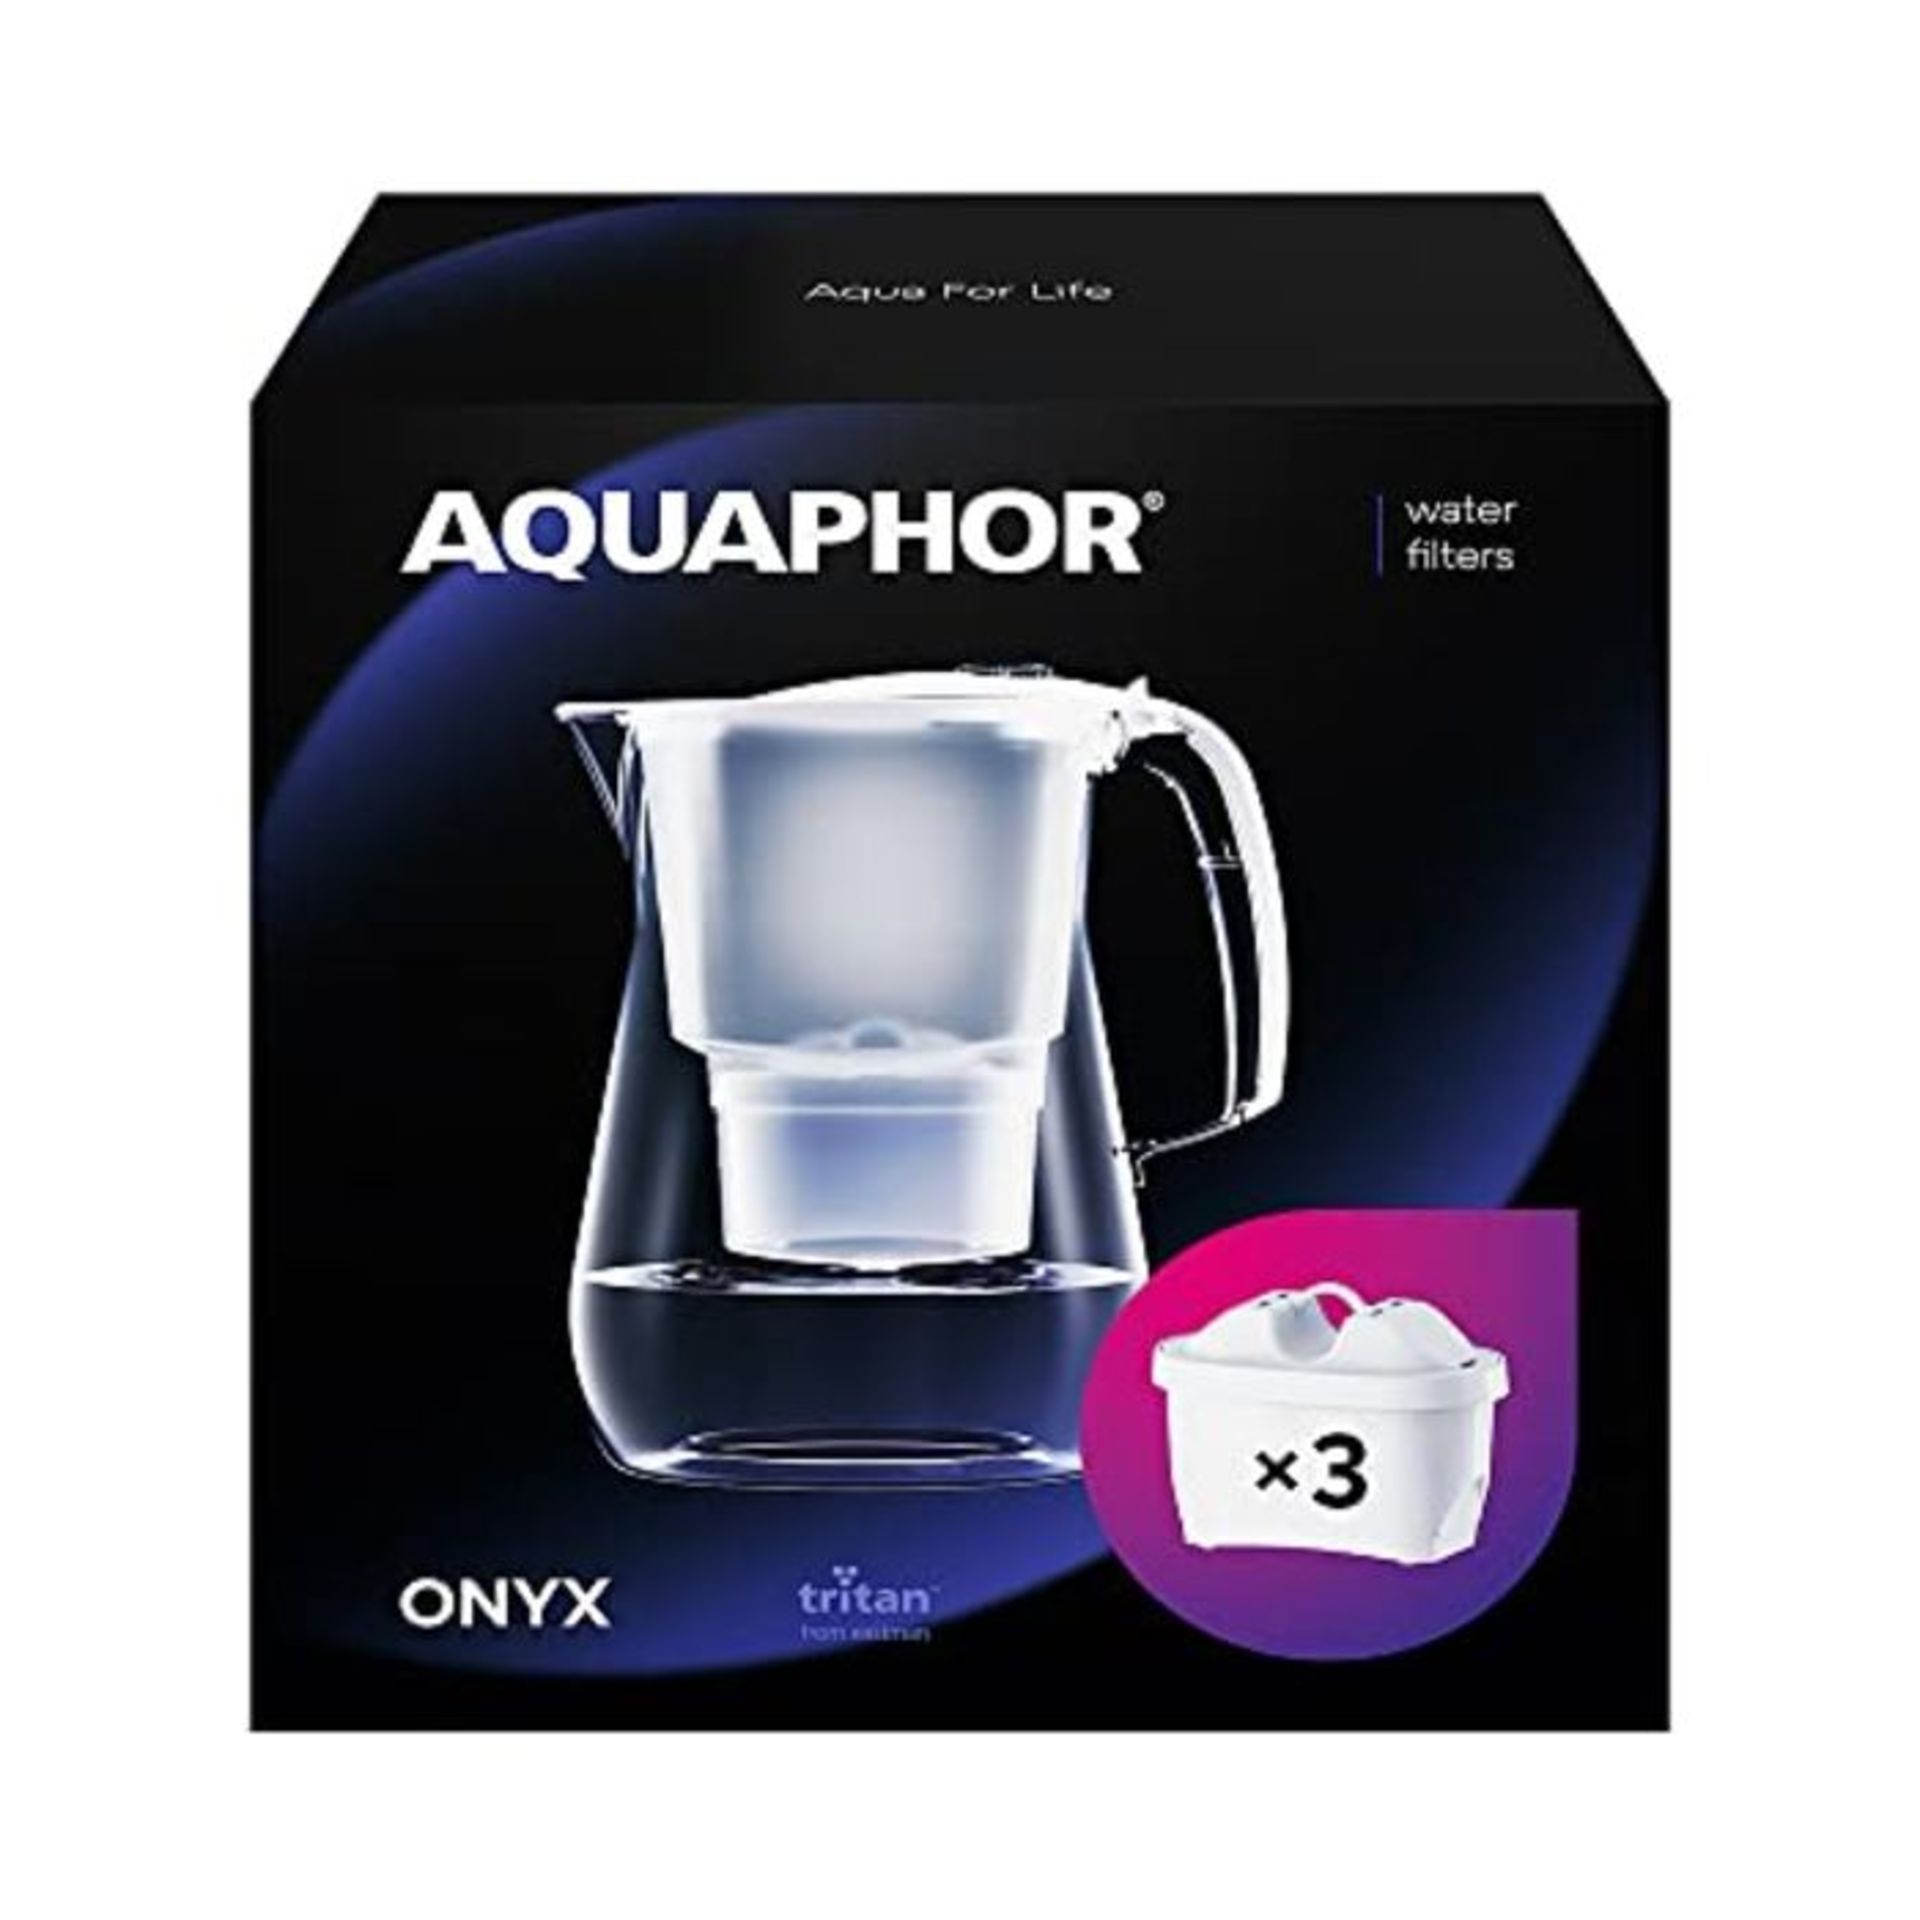 AQUAPHOR Onyx Water Filter Jug 4.2L, for reduction of limescale, Chlorine and other im